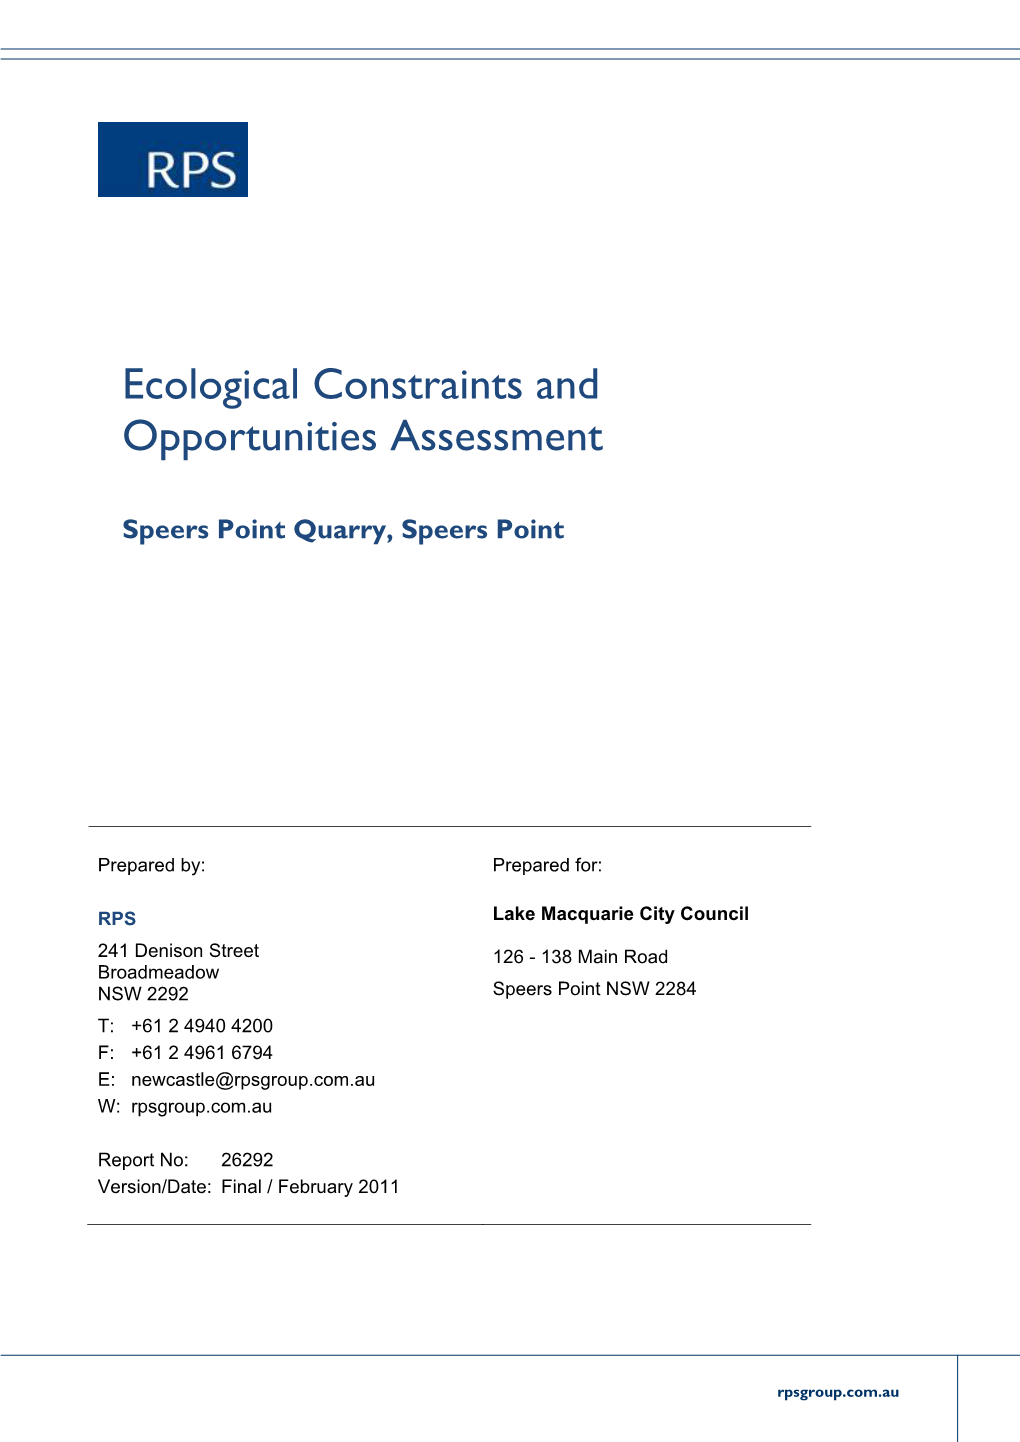 Ecological Constraints and Opportunities Assessment